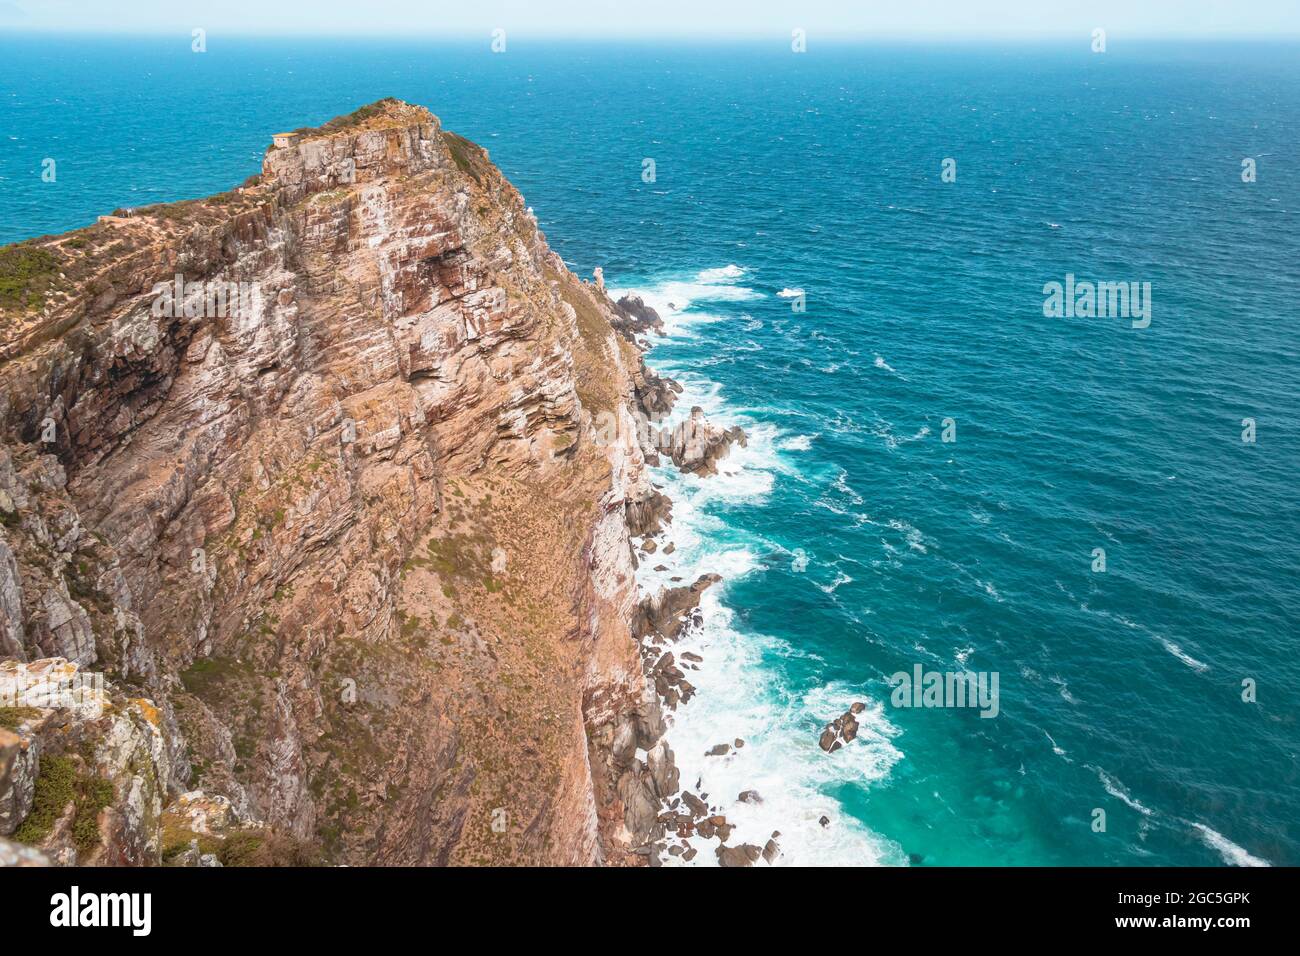 The view of rock headland above the Atlantic Ocean at Cape Point, a mountainous promontory of Cape Point National Park in Cape Peninsula, South Africa. Stock Photo